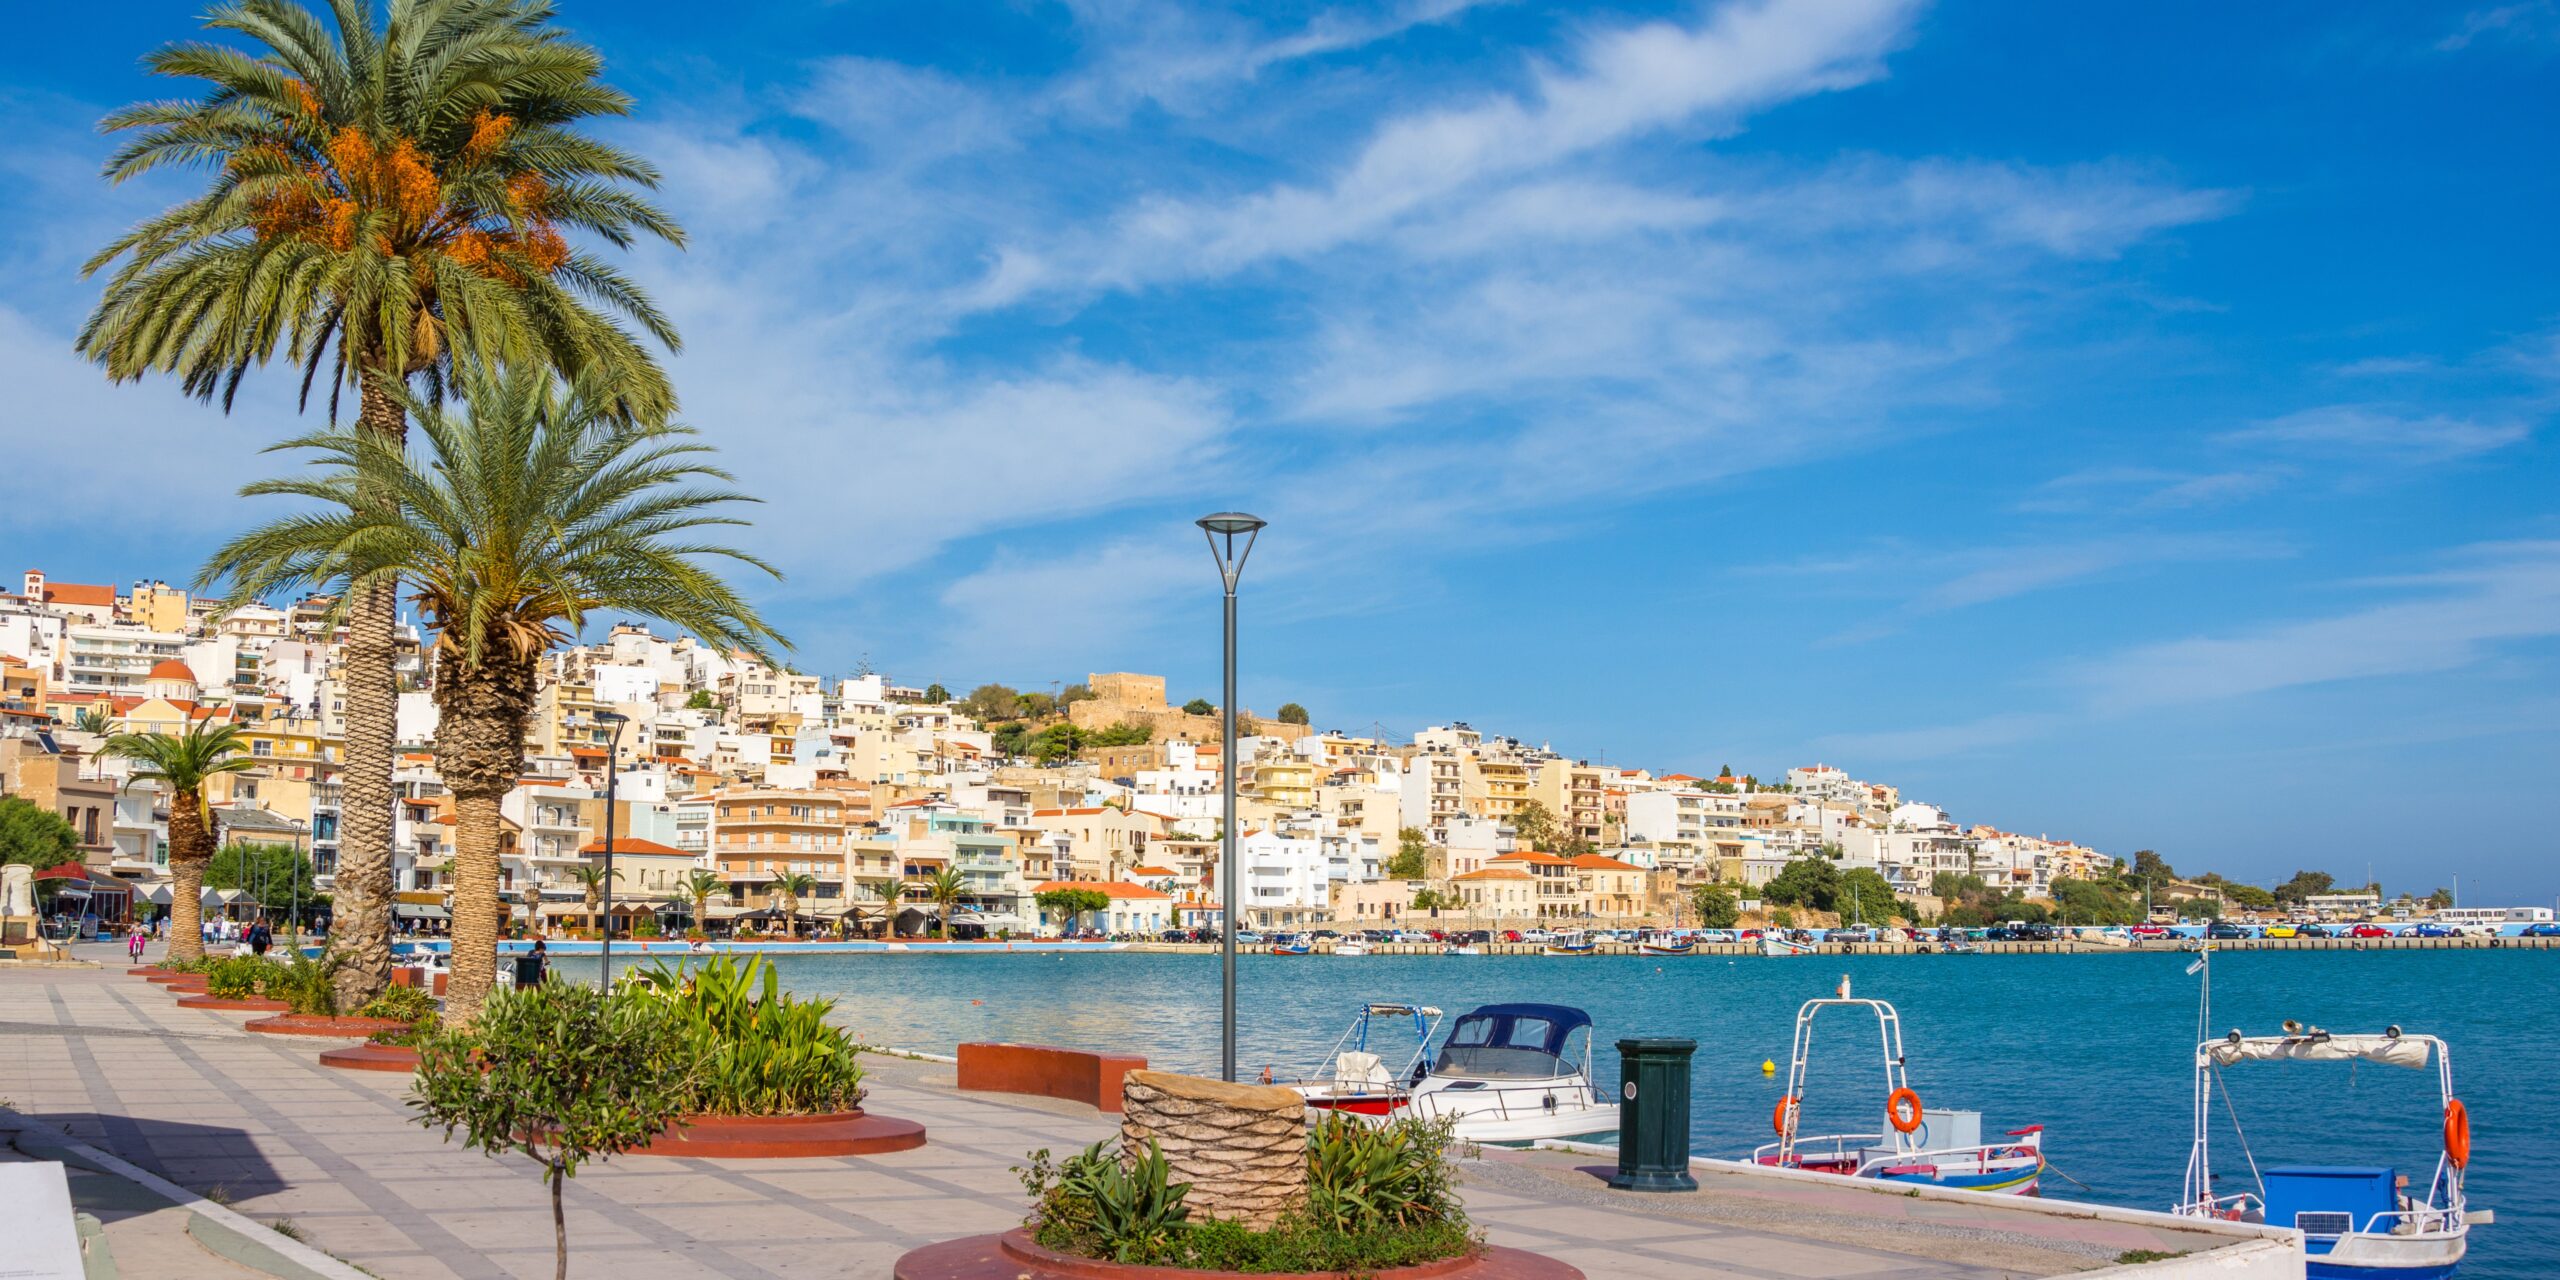 A seaside promenade with palm trees, street lamps, and boats moored along the waterfront, with a view of a densely built hillside town under a blue sky.